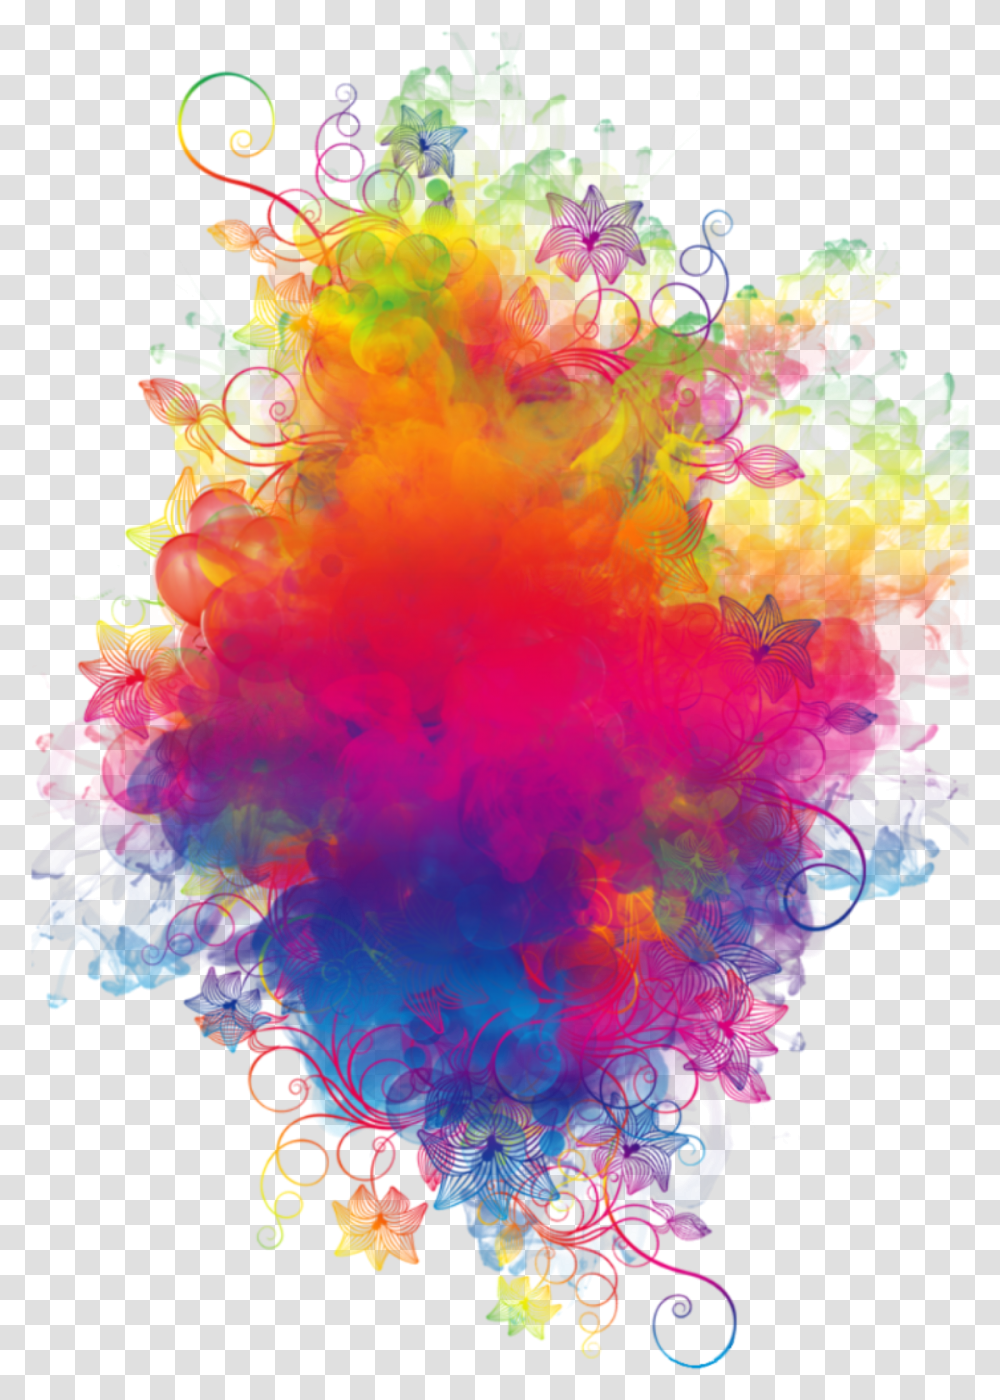 Boom Smoke Colorful Watercolor Rainbow Flowers Colorspl Colorful Smoke Background Transparent Png